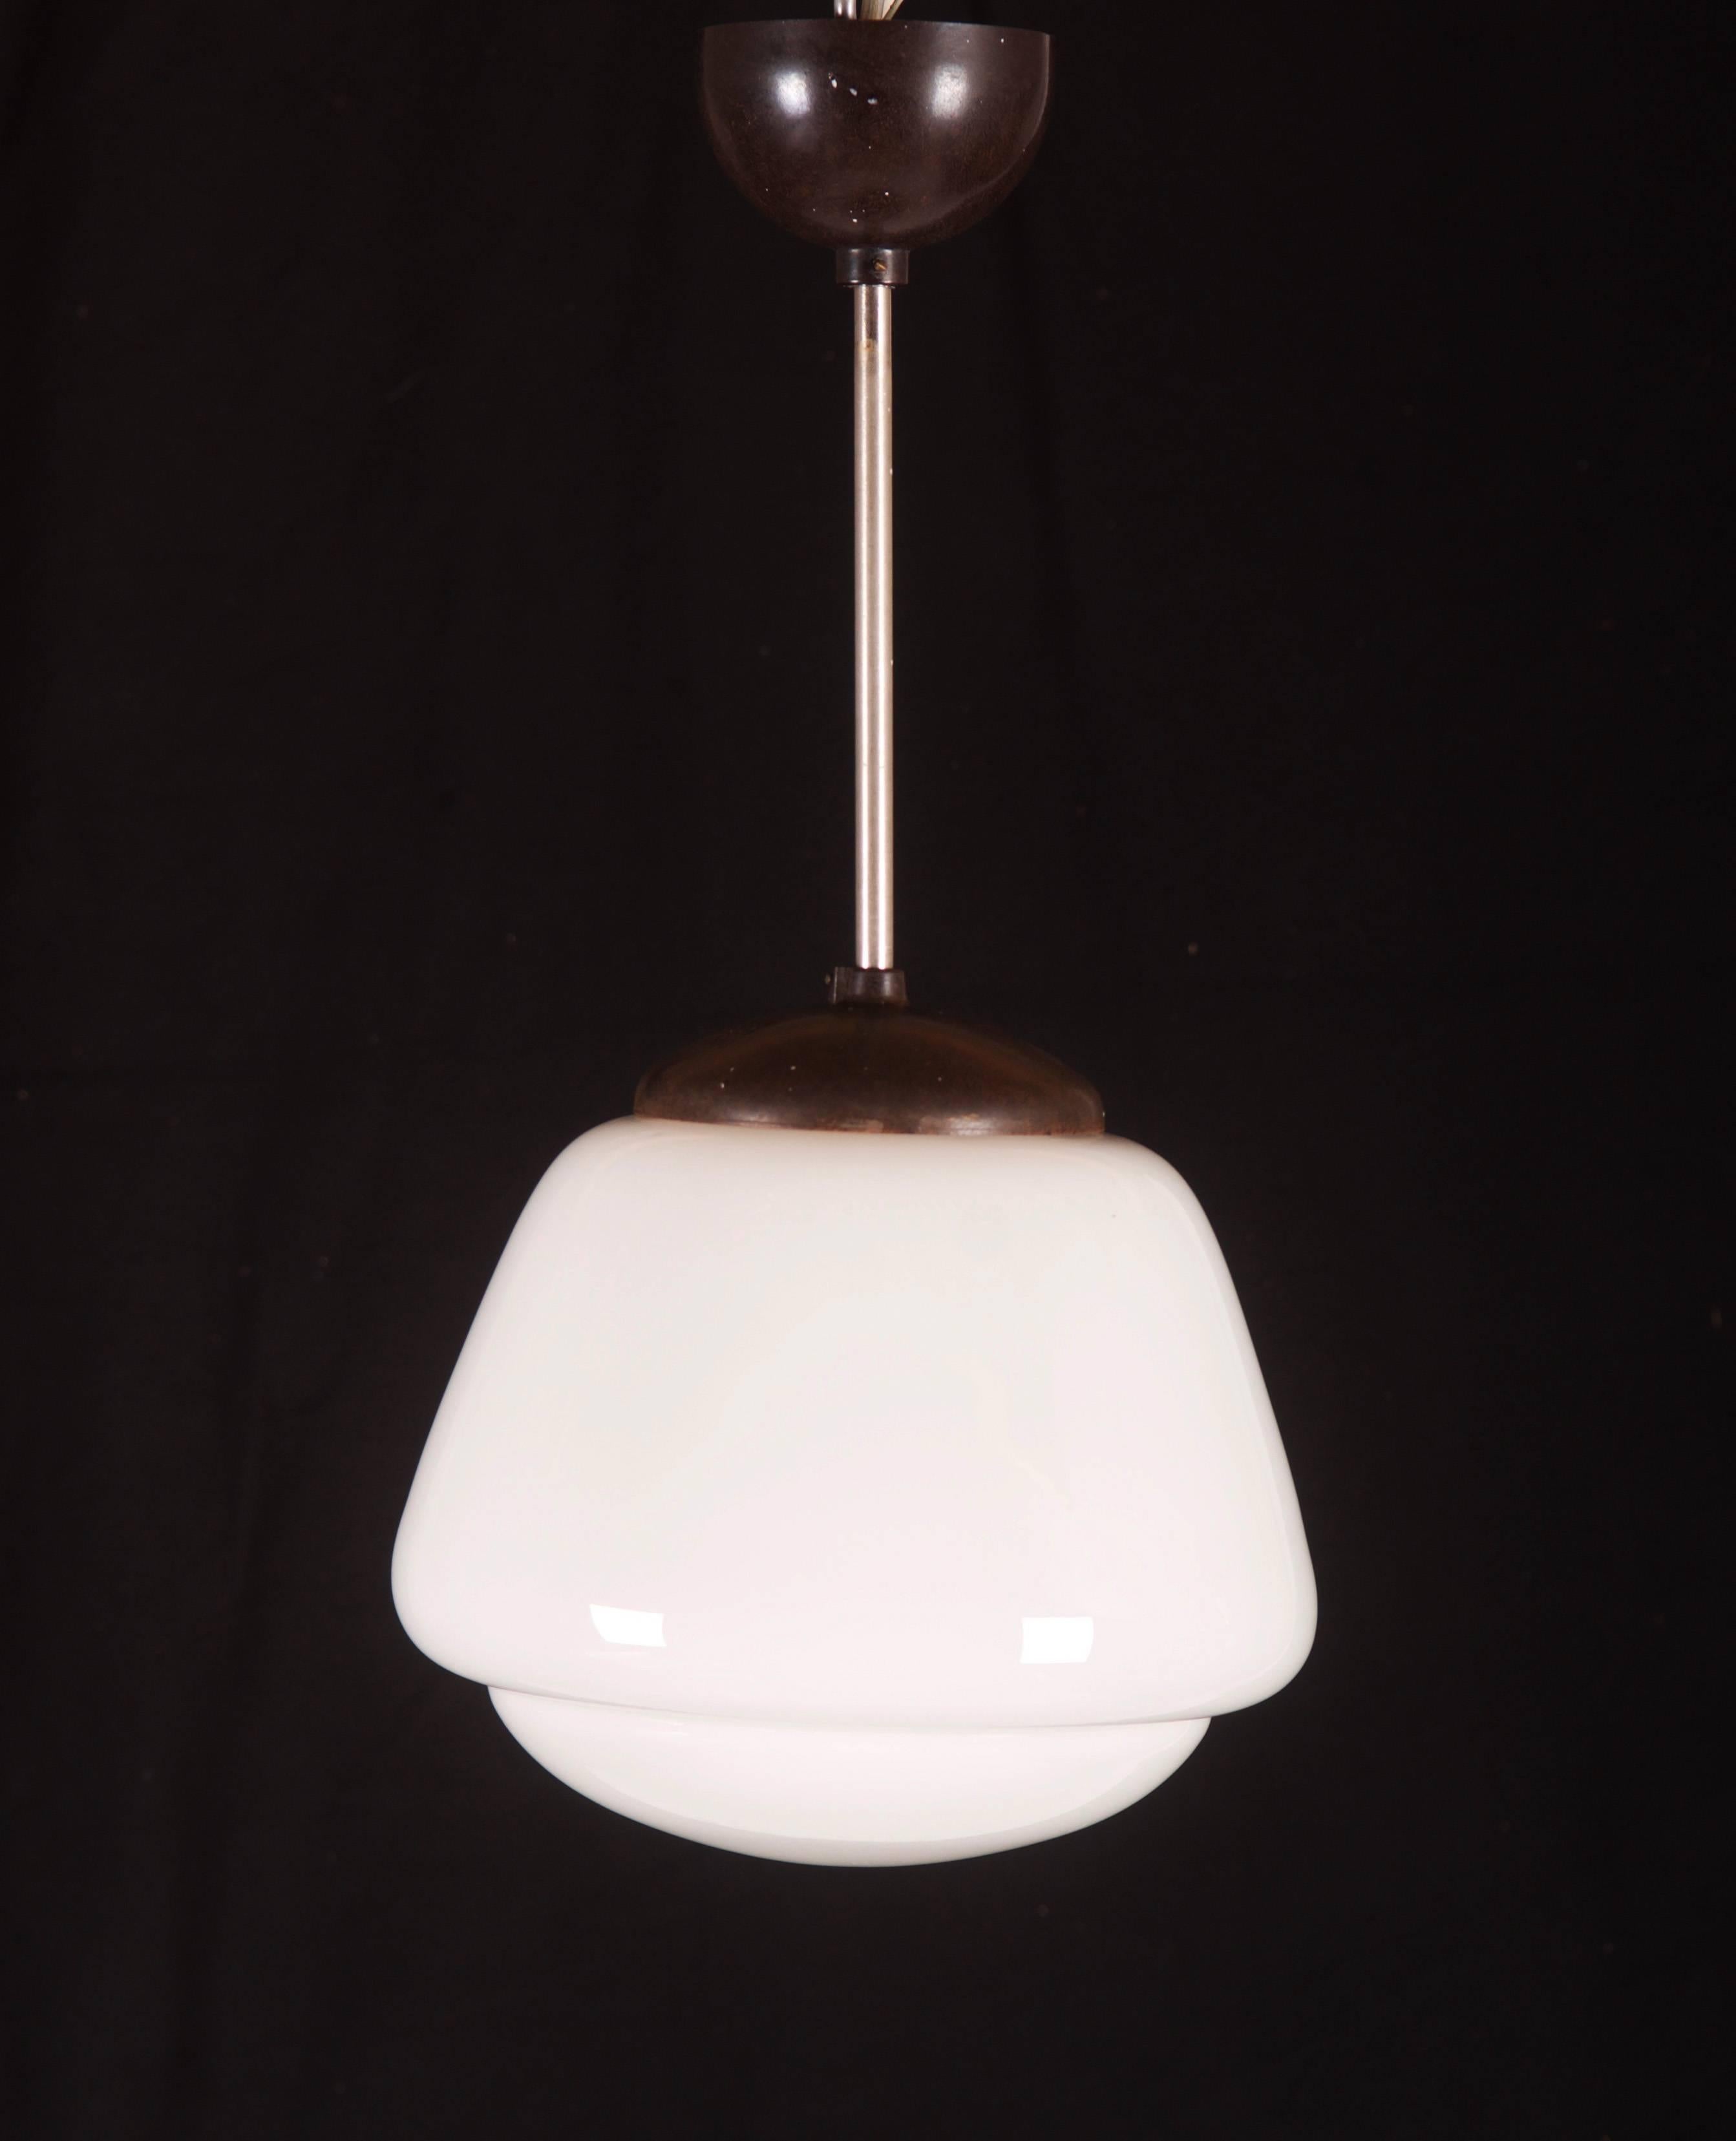 Bauhaus pendant from the 1940s.
Opaline glass shade mounted on a steel construction, cover and shade made of bakelite.
Up to 20 pieces available.